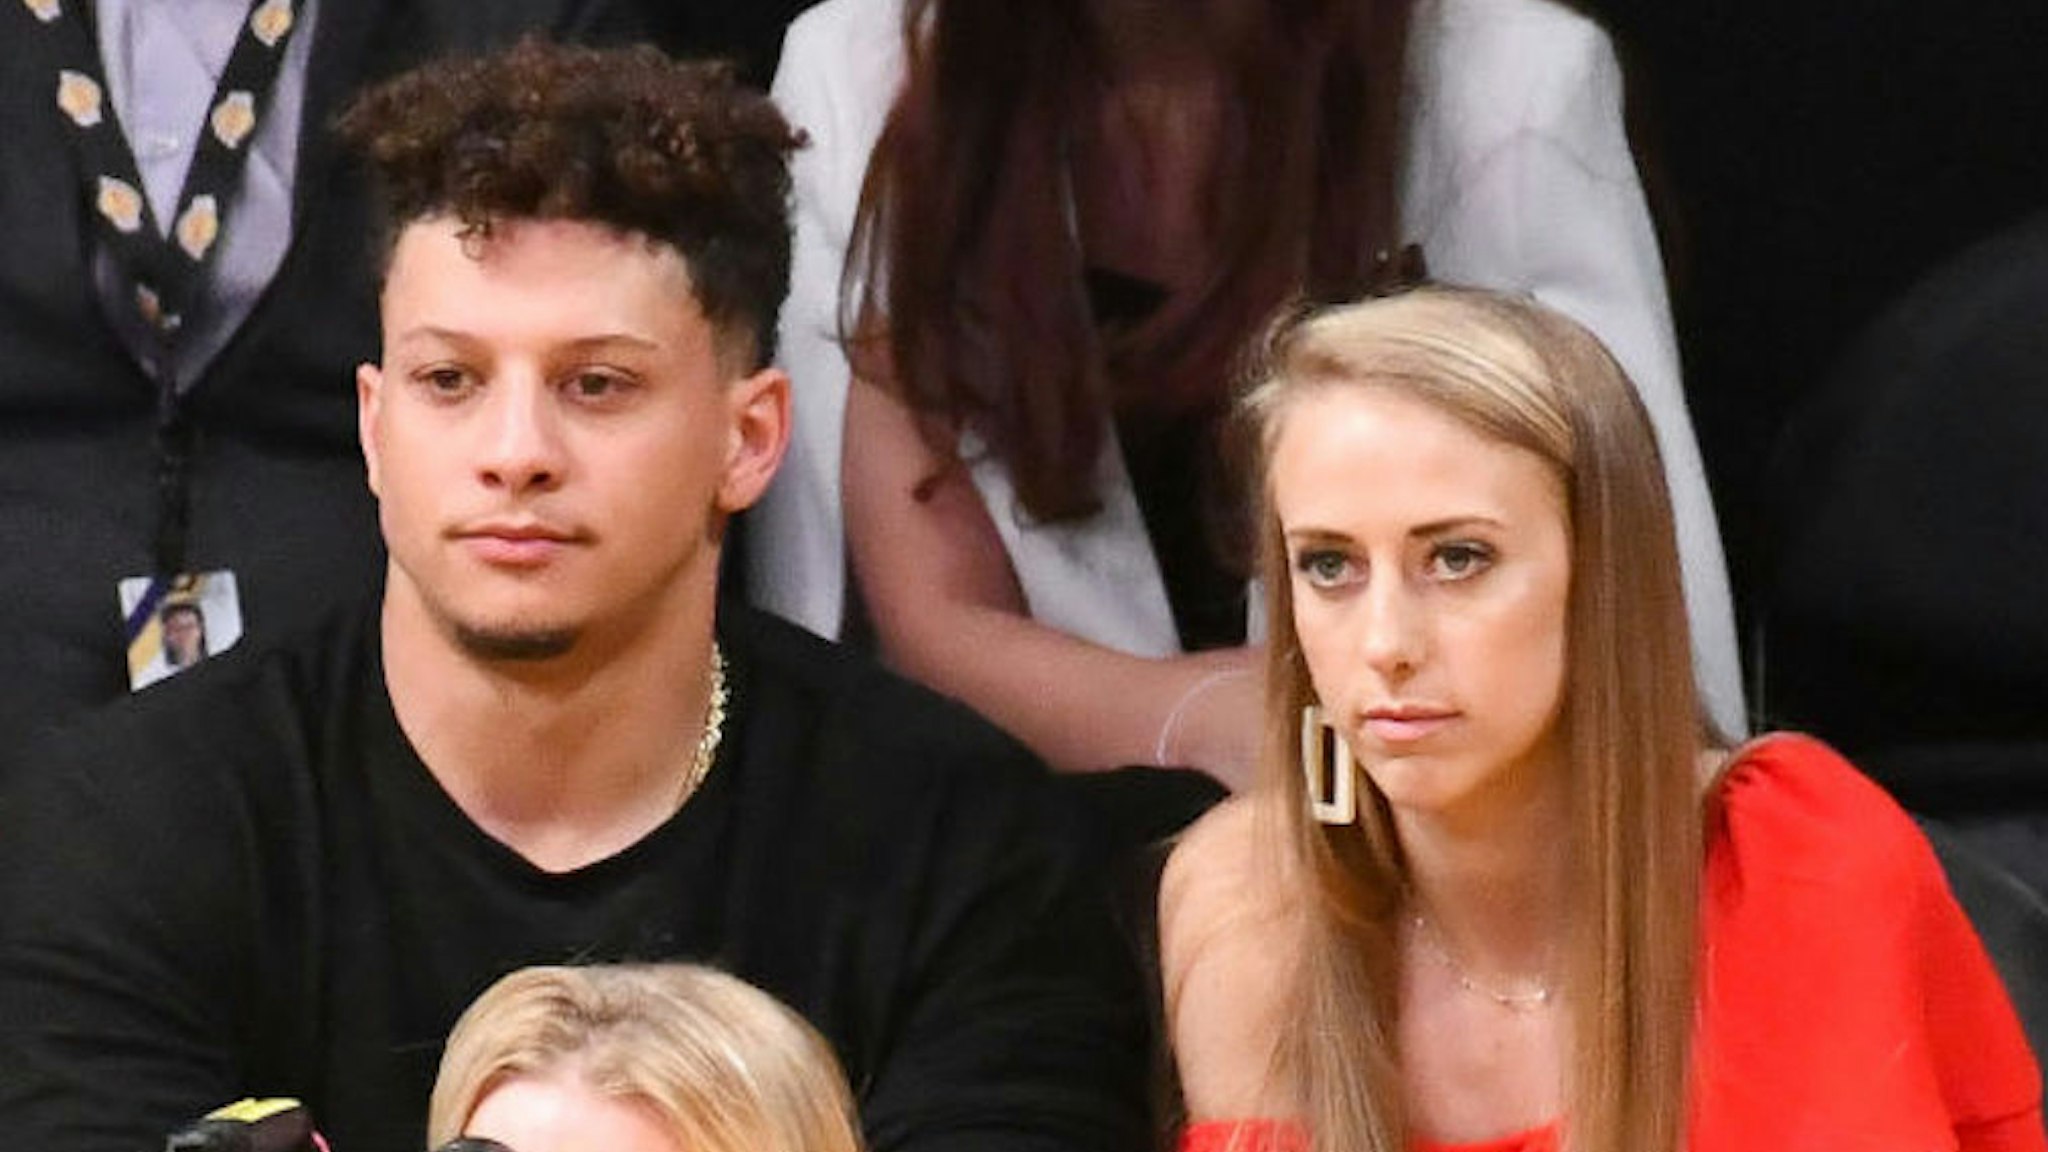 LOS ANGELES, CALIFORNIA - FEBRUARY 27: Patrick Mahomes and Brittany Matthews attend a basketball game between the Los Angeles Lakers and the New Orleans Pelicans at Staples Center on February 27, 2019 in Los Angeles, California. (Photo by Allen Berezovsky/Getty Images)